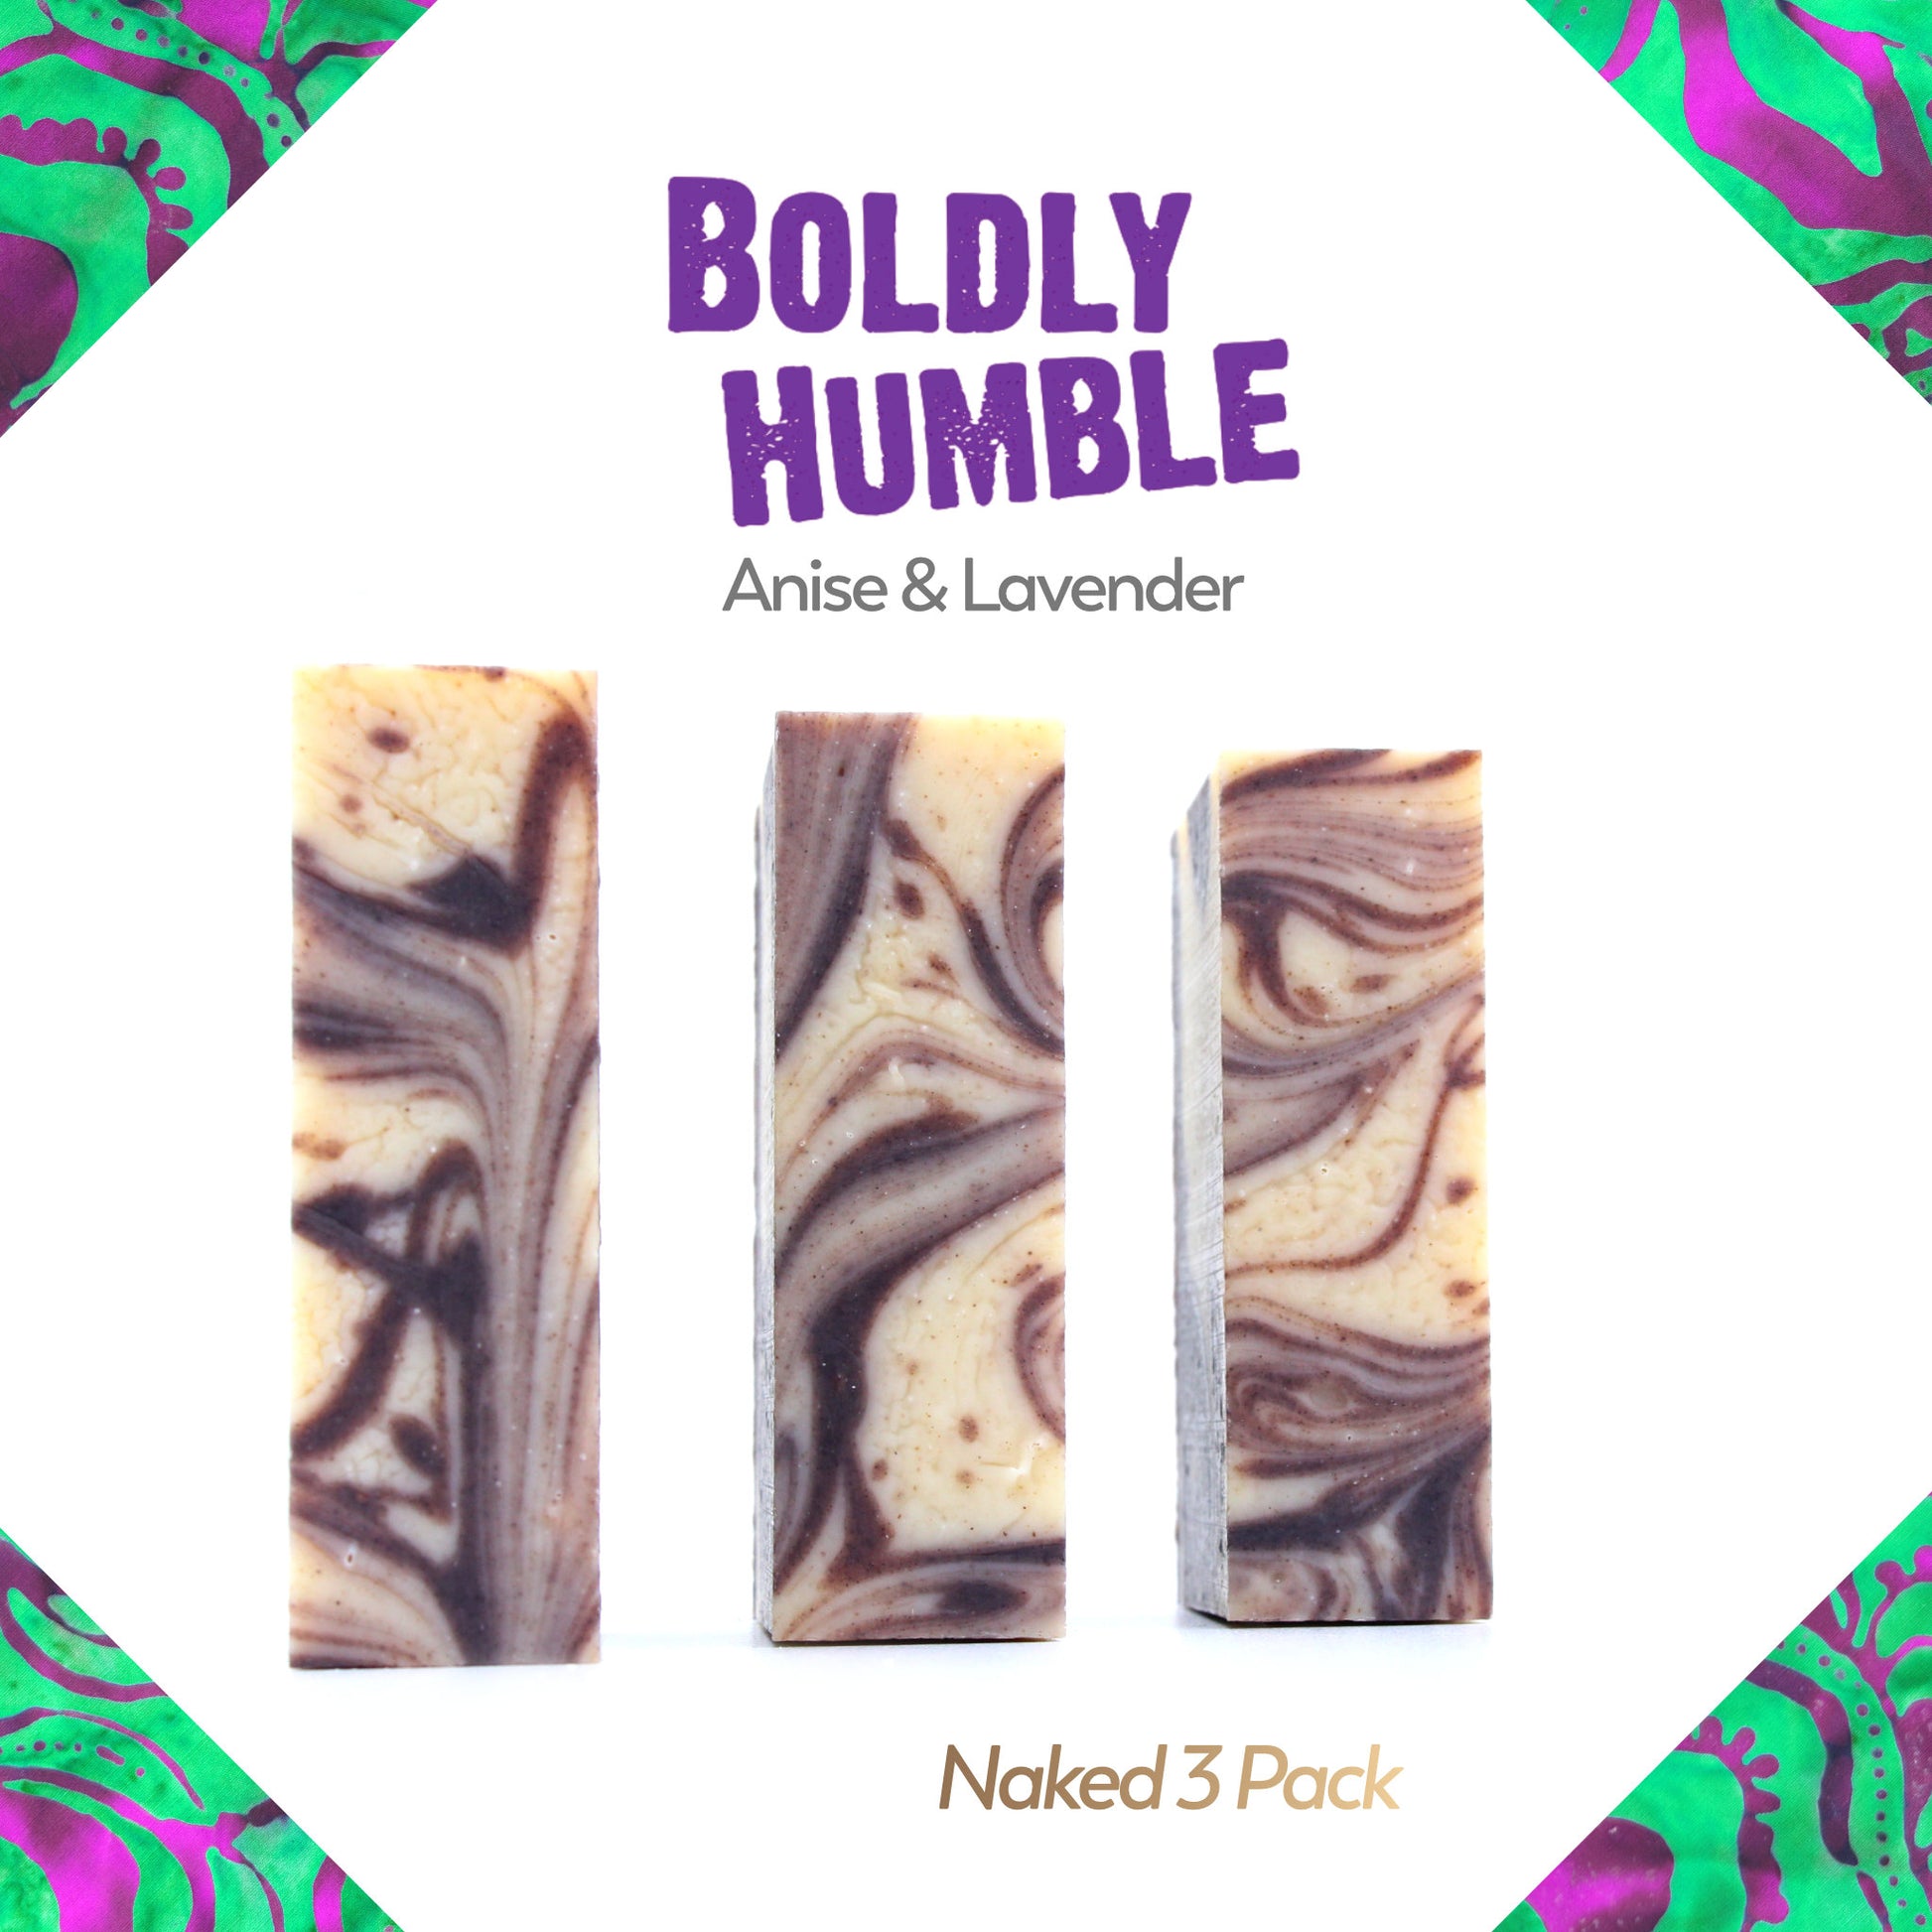 Naked three pack of Boldly Humble star anise essential oil organic bar soap from ground Soap.